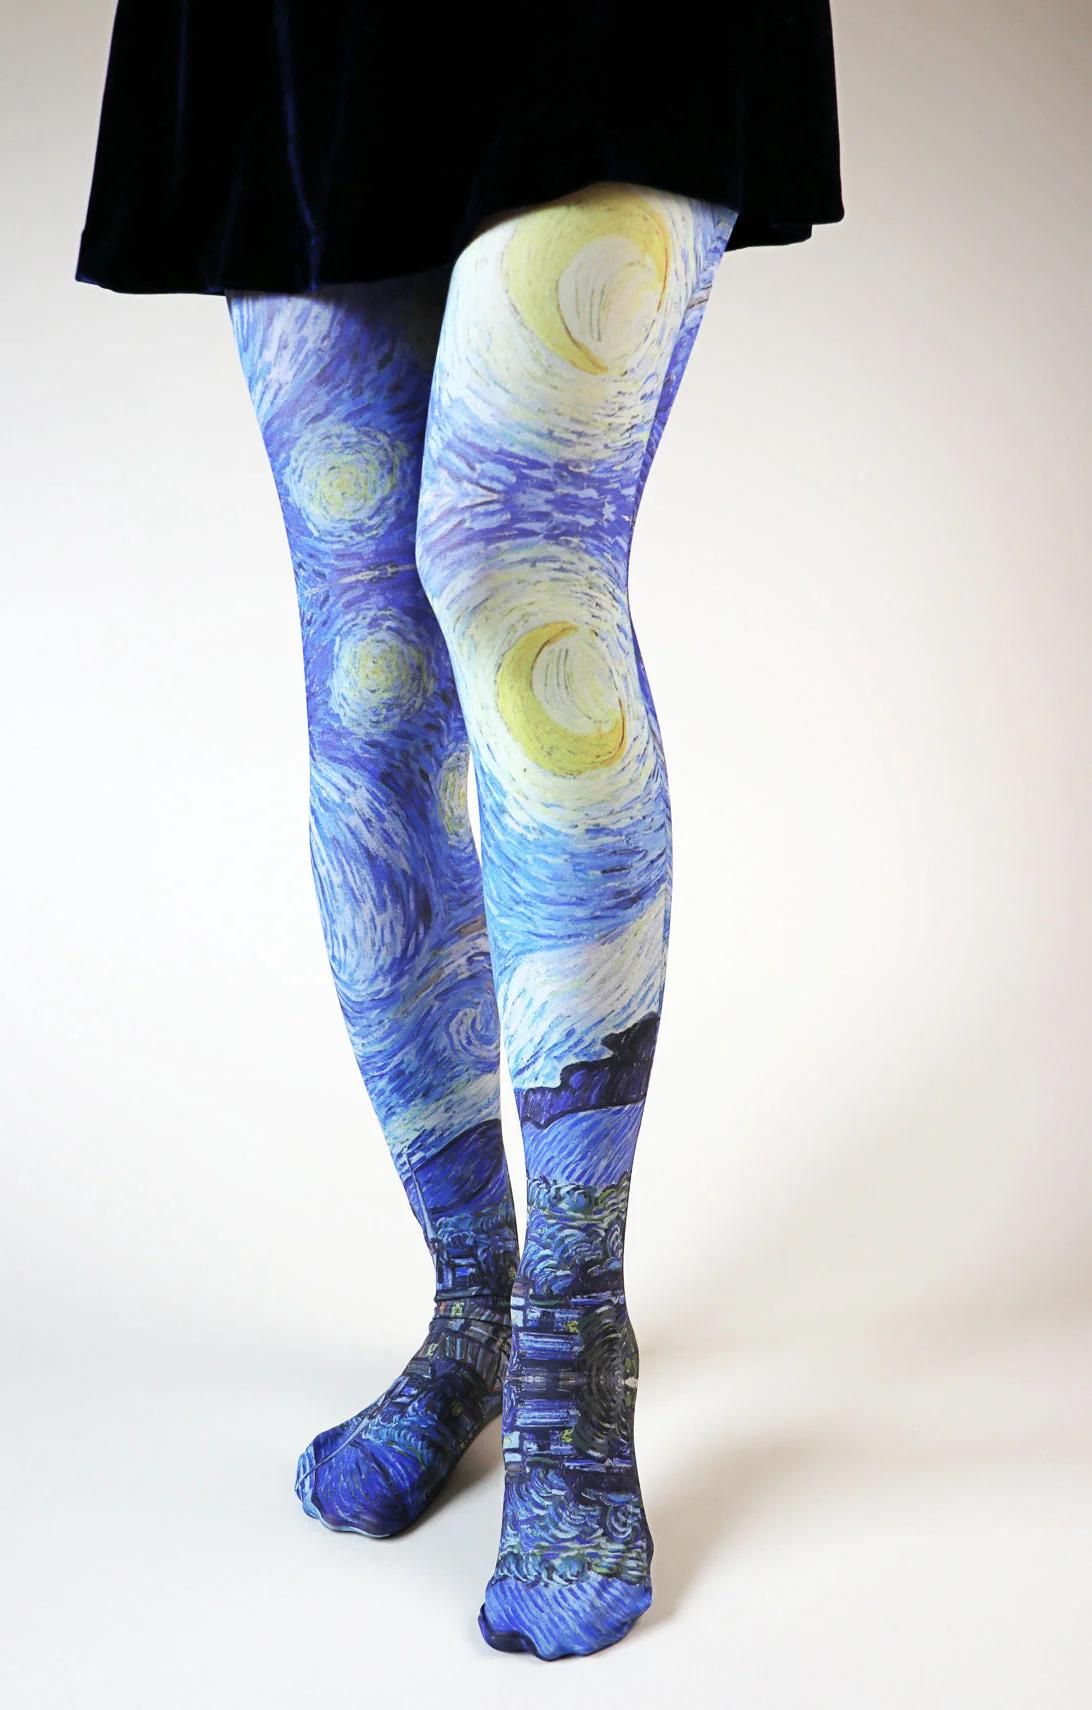 TABBISOCKS brand Van Gogh Collection with designs of THE STARRY NIGHT's works, overall yellow and navy blue color